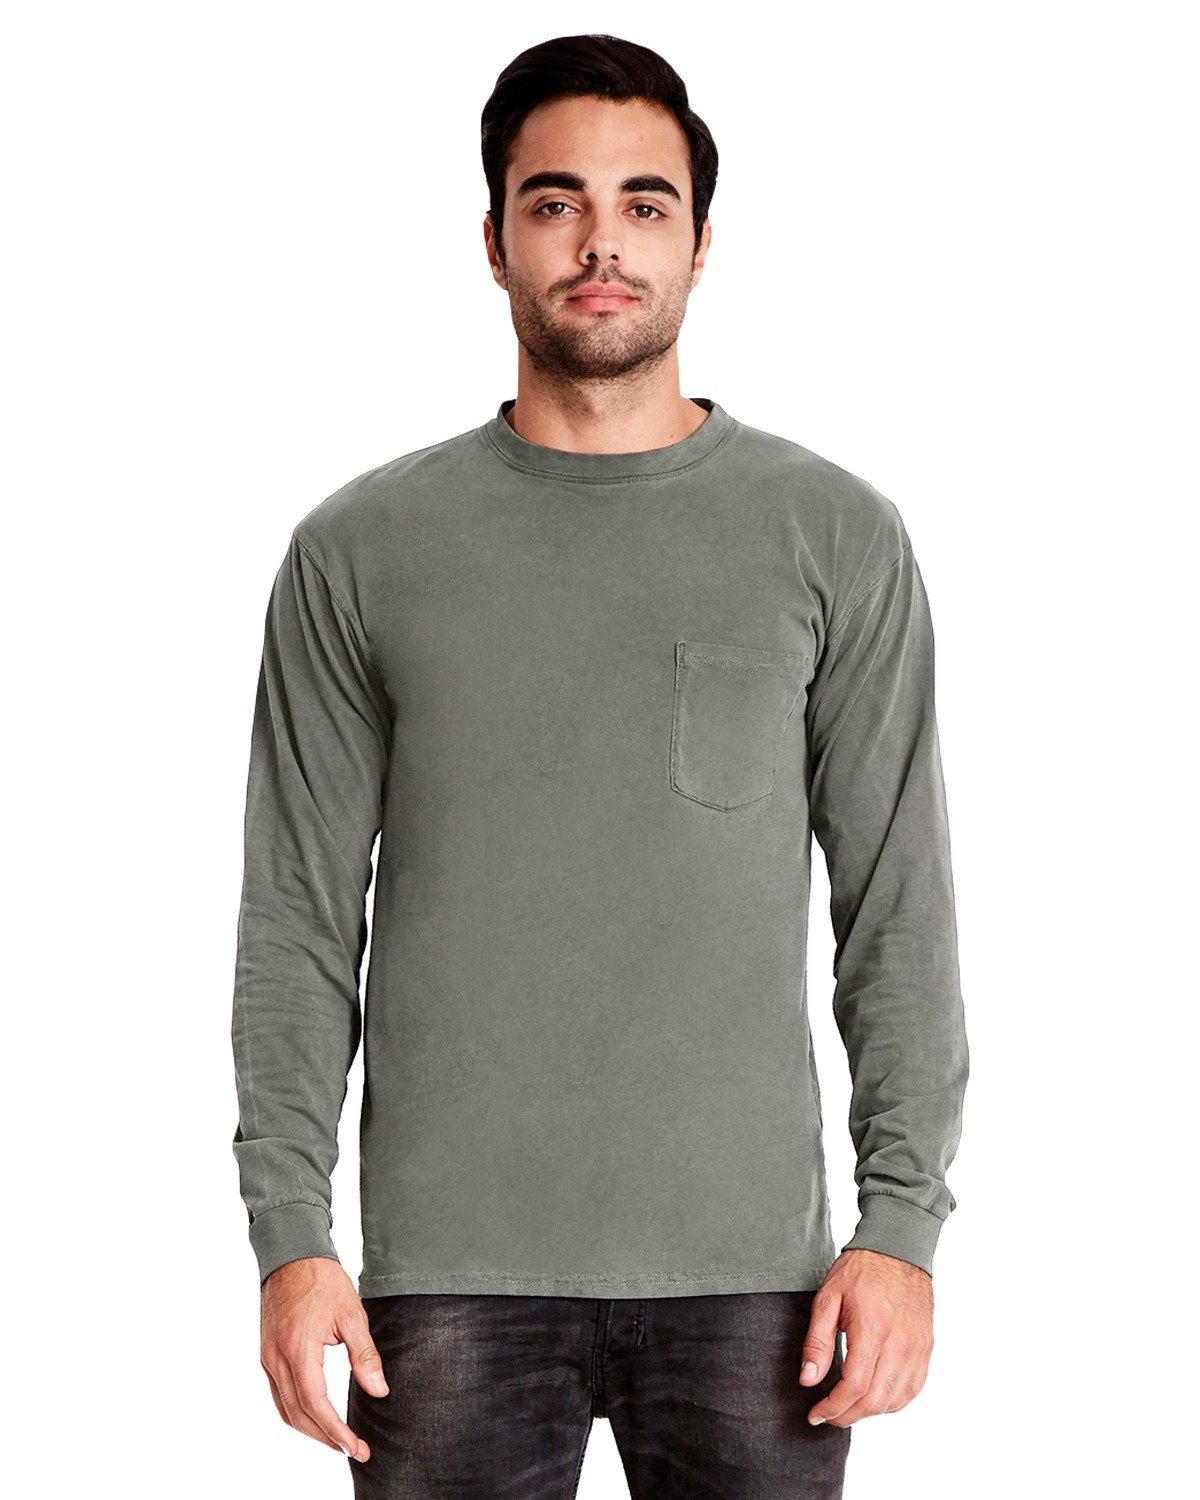 Next Level Apparel Adult Inspired Dye Long-Sleeve Crew with Pocket LEAD 